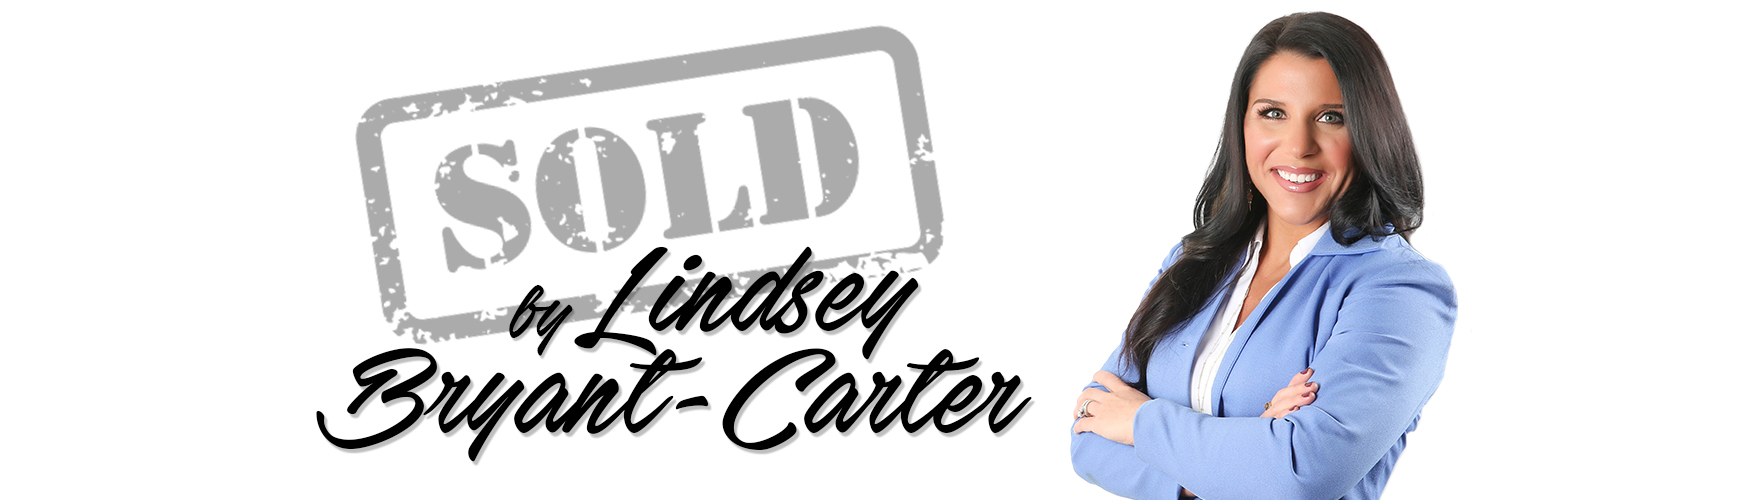 Sold by Lindsey Bryant-Carter